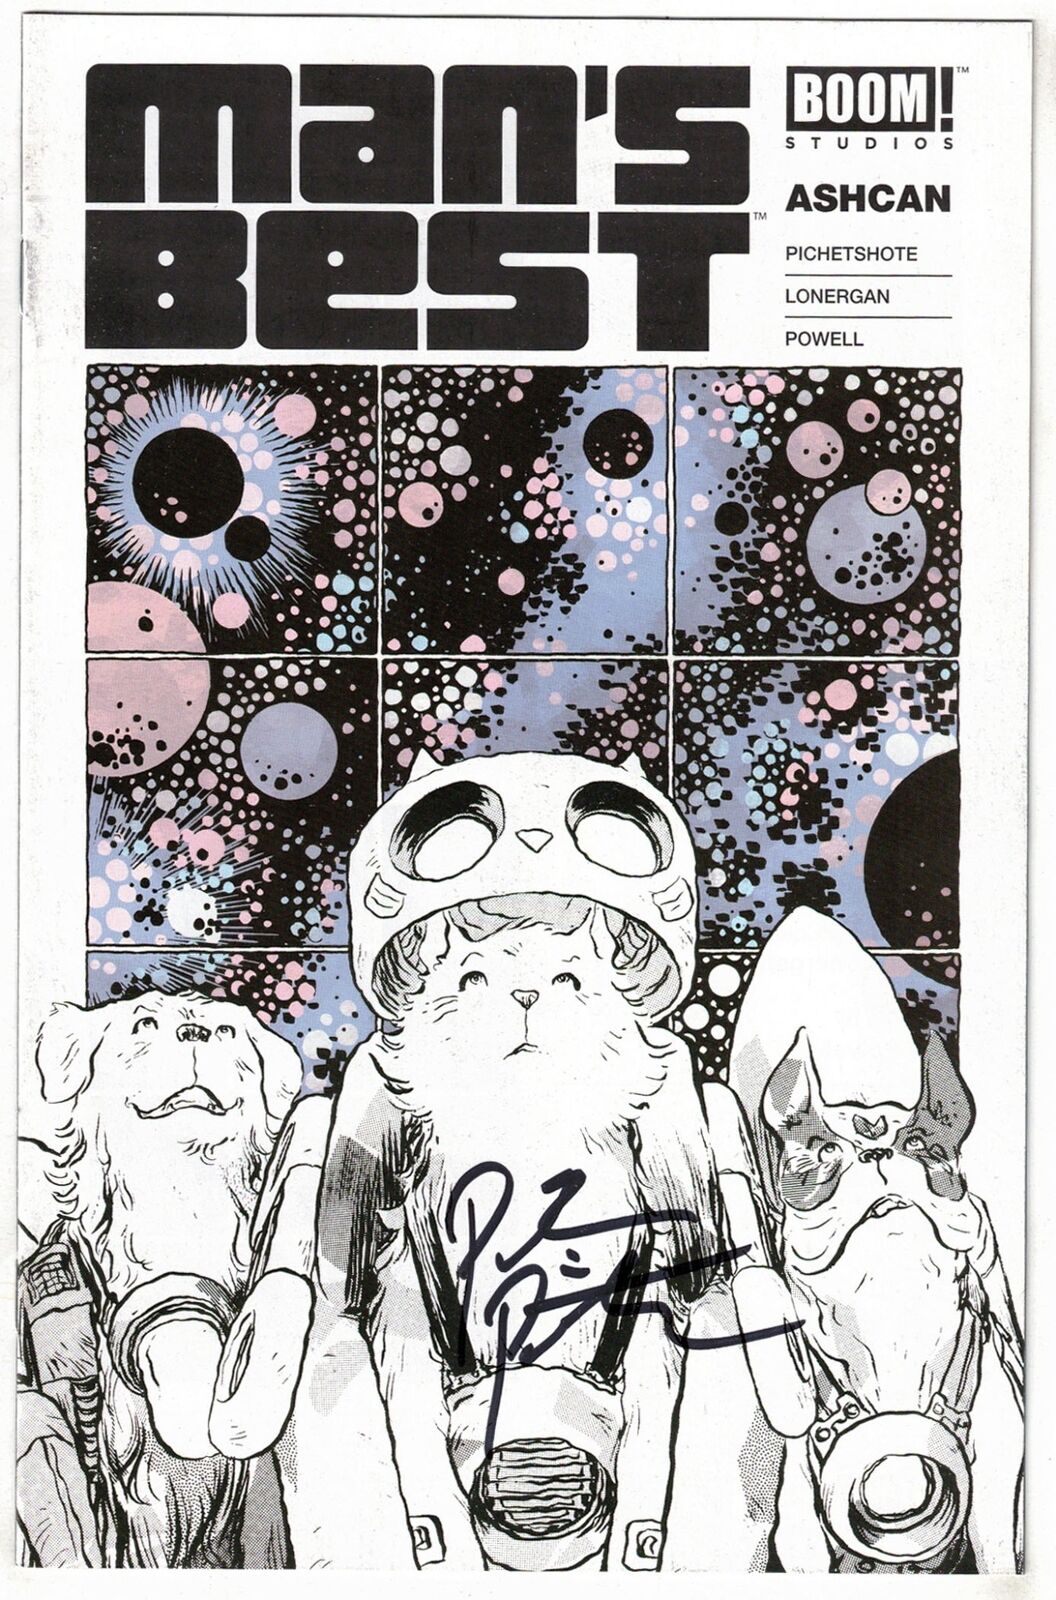 MAN'S BEST #1 PREVIEW ASHCAN- SIGNED BY WRITER PICHETSHOTE W/COA- BOOM- VF+